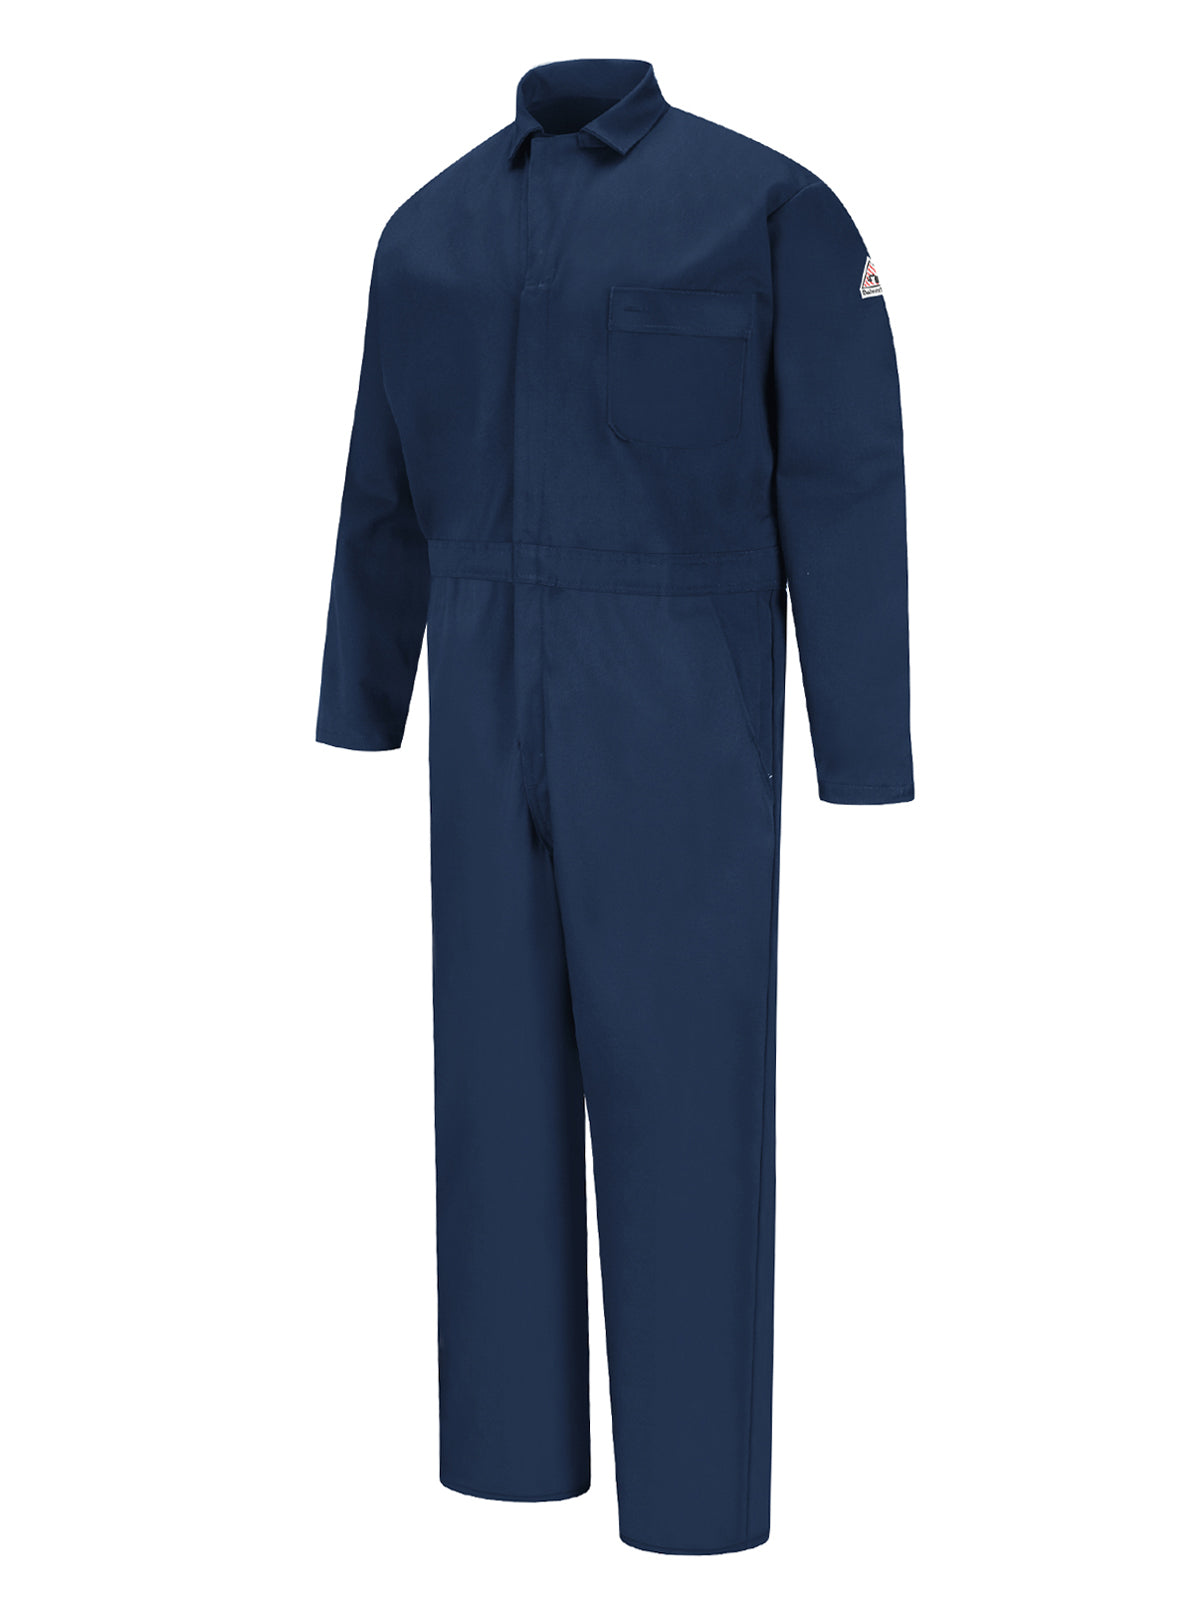 Men's Midweight Excel Flame-Resistant Industrial Classic Coverall - CEH2 - Navy